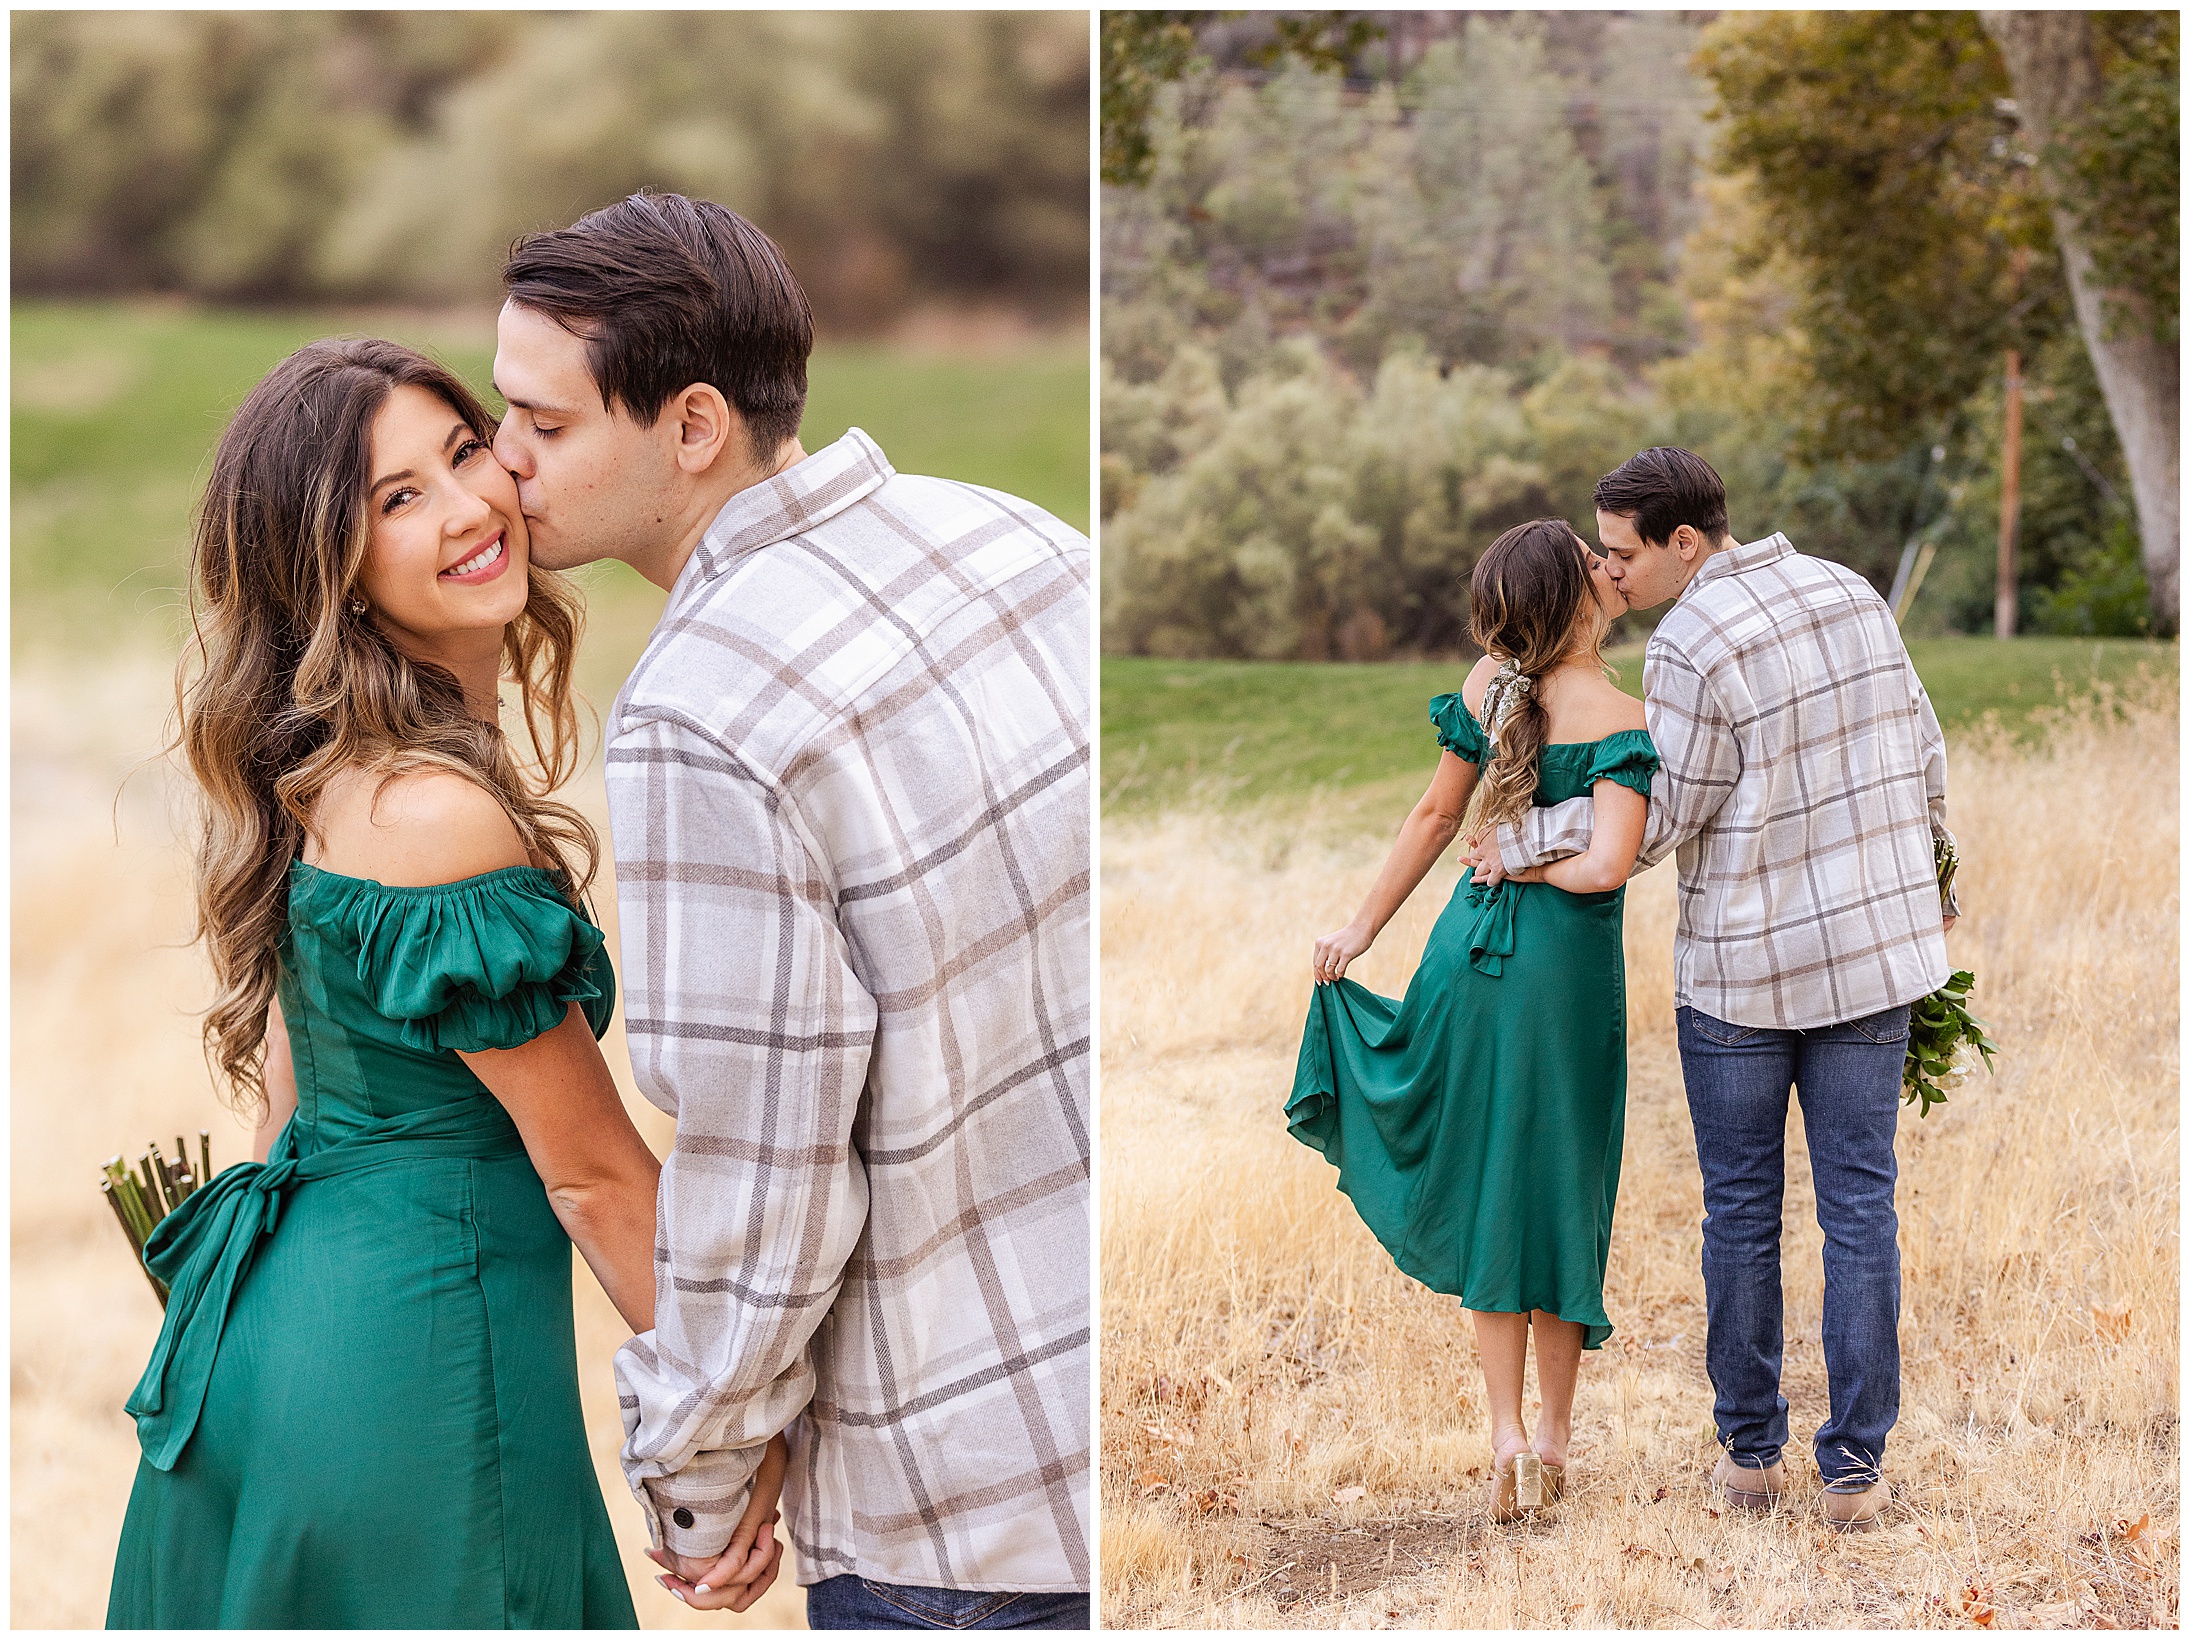 Creekside Bidwell Park Golf Course Engagement Session Floral Bouquet Champagne Roses Green Dress,